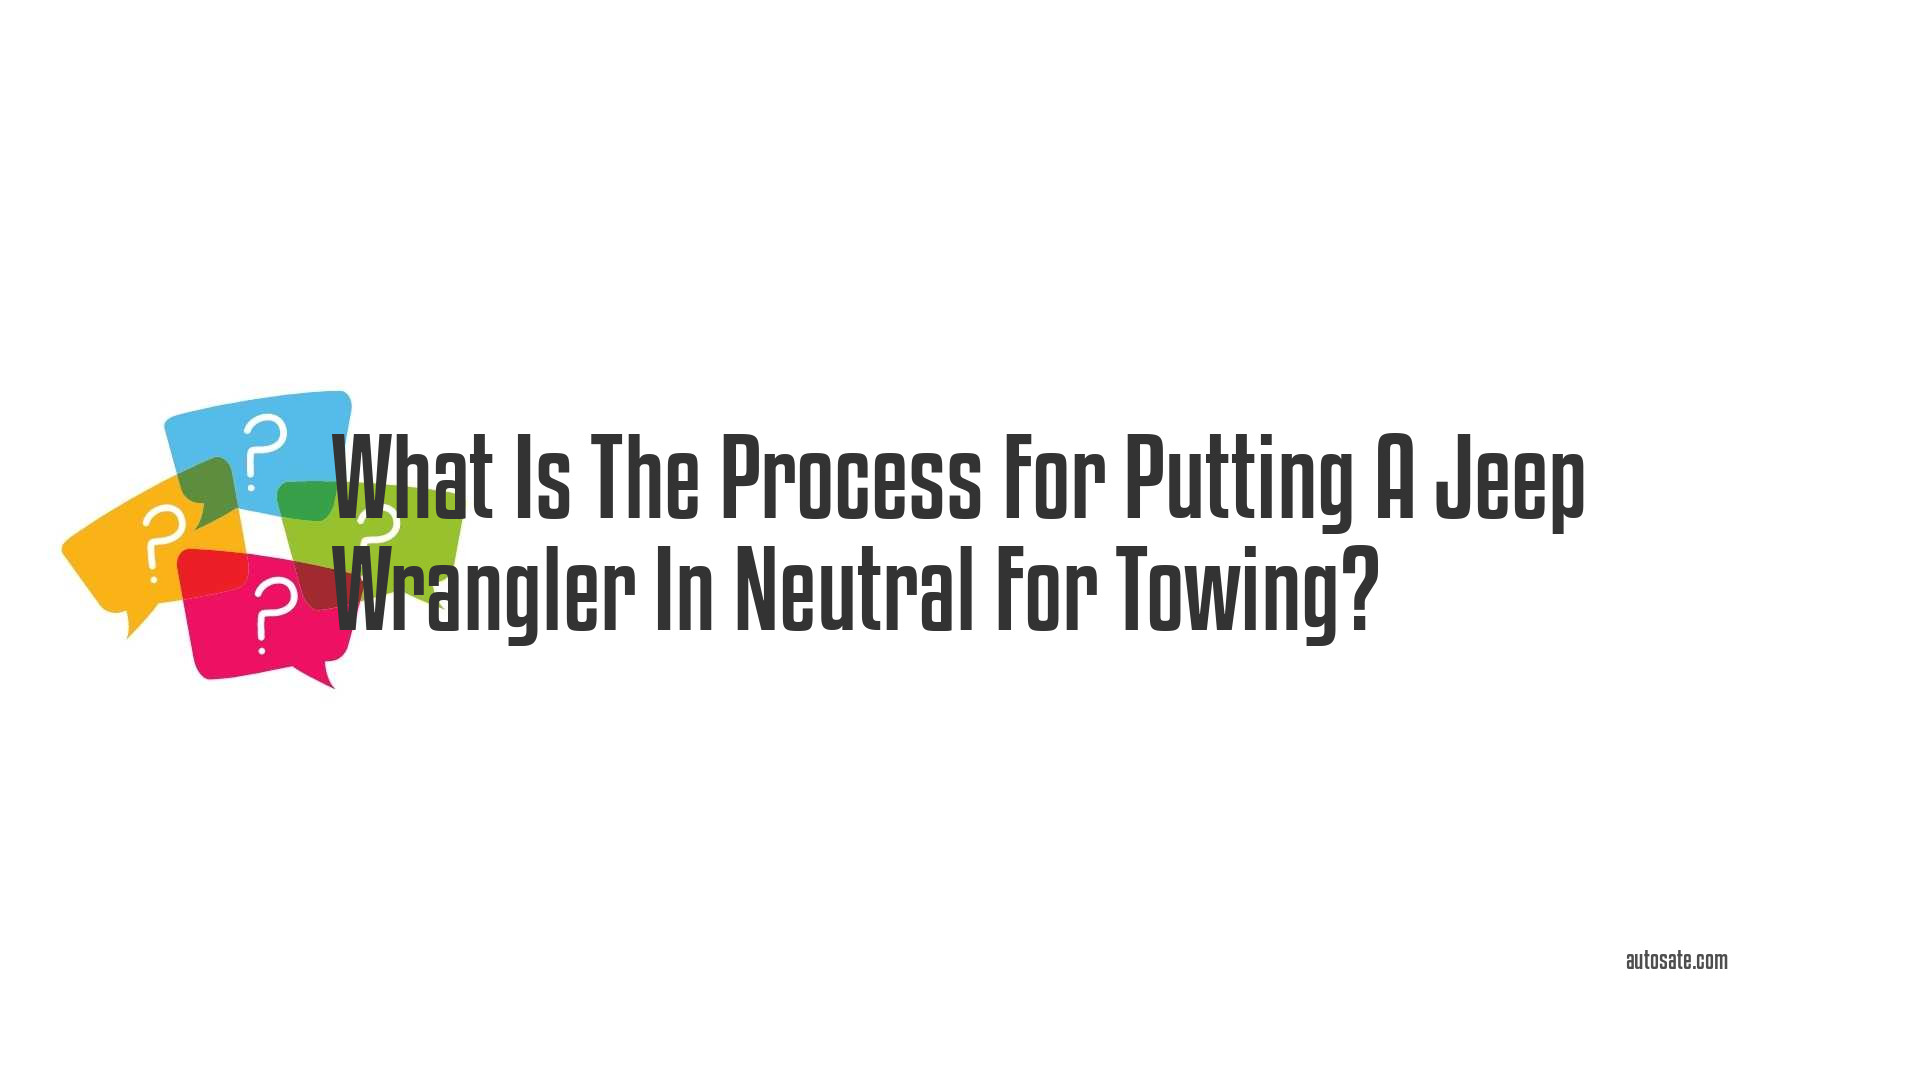 What Is The Process For Putting A Jeep Wrangler In Neutral For Towing?